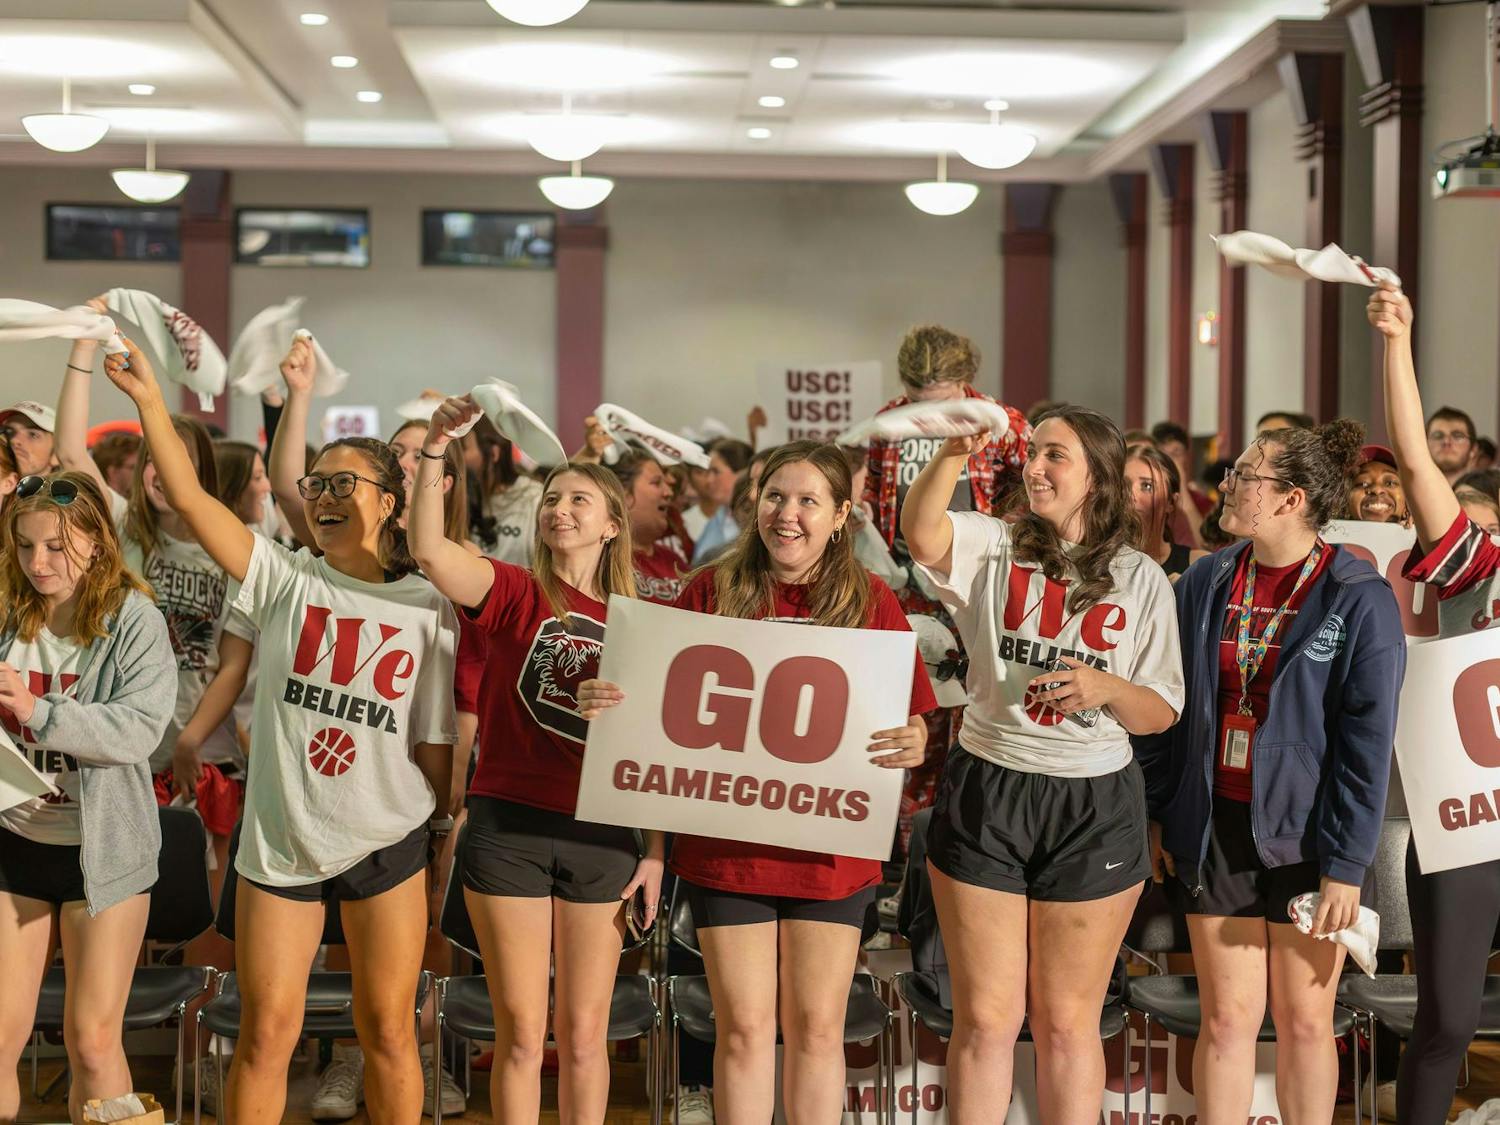 University of South Carolina students gather in the Russell House Student Union to cheer on the Gamecock women's basketball team as it competes in the final round of the NCAA Women's Tournament against Iowa on April 7, 2024. The Gamecocks defeated the Hawkeyes 87-75 and claimed Dawn Staley's third national title as head coach.